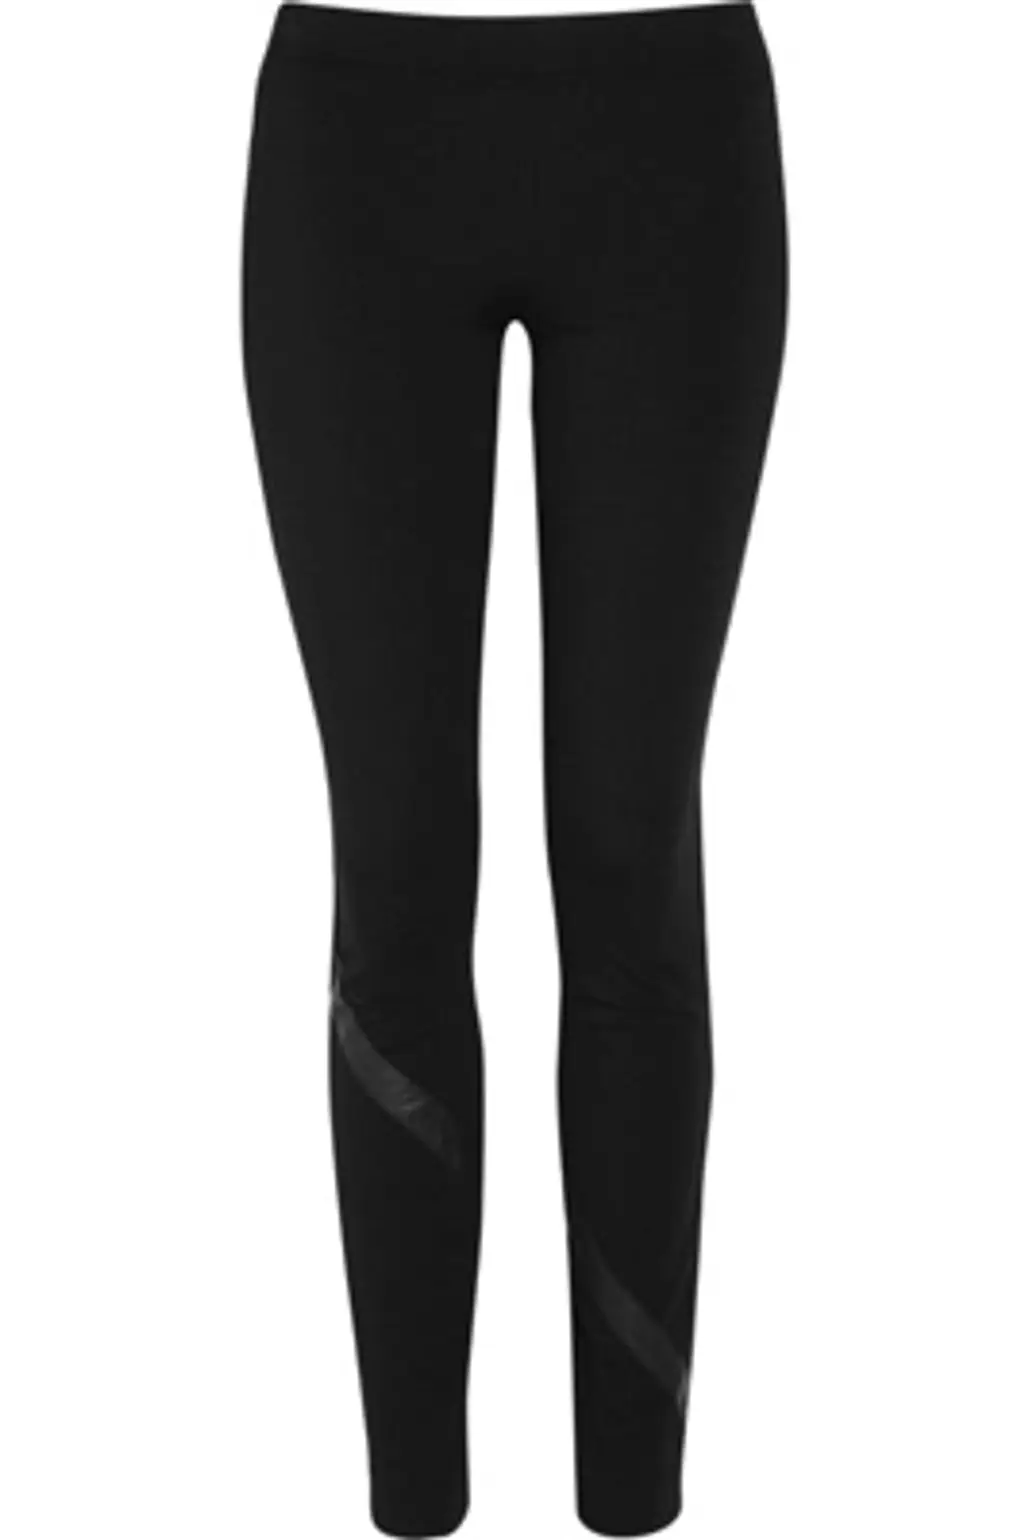 DKNY Jersey and Leather Leggings